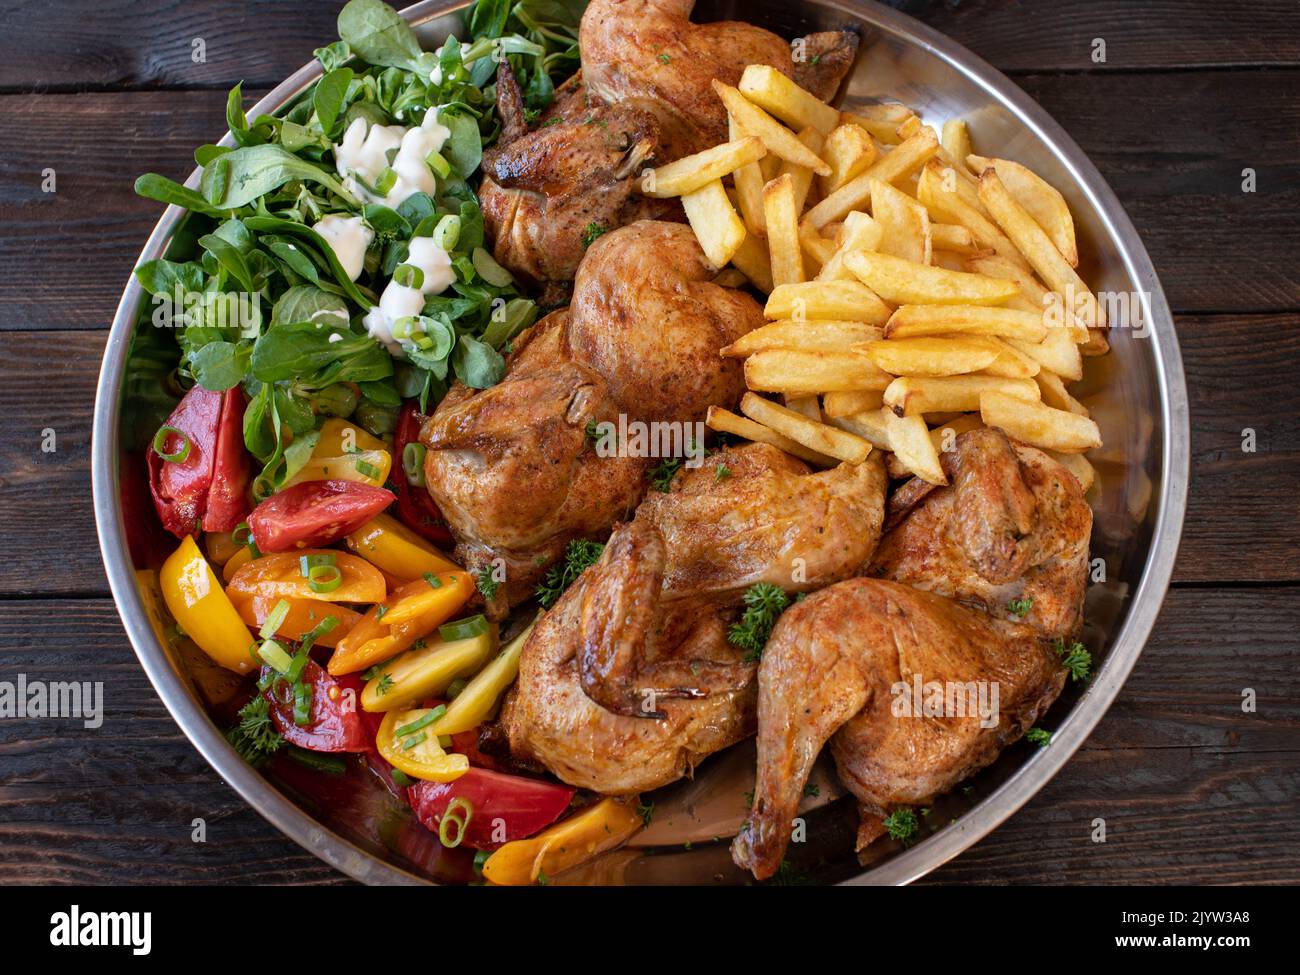 Oven baked chicken with salad and homemade french fries on a large platter Stock Photo